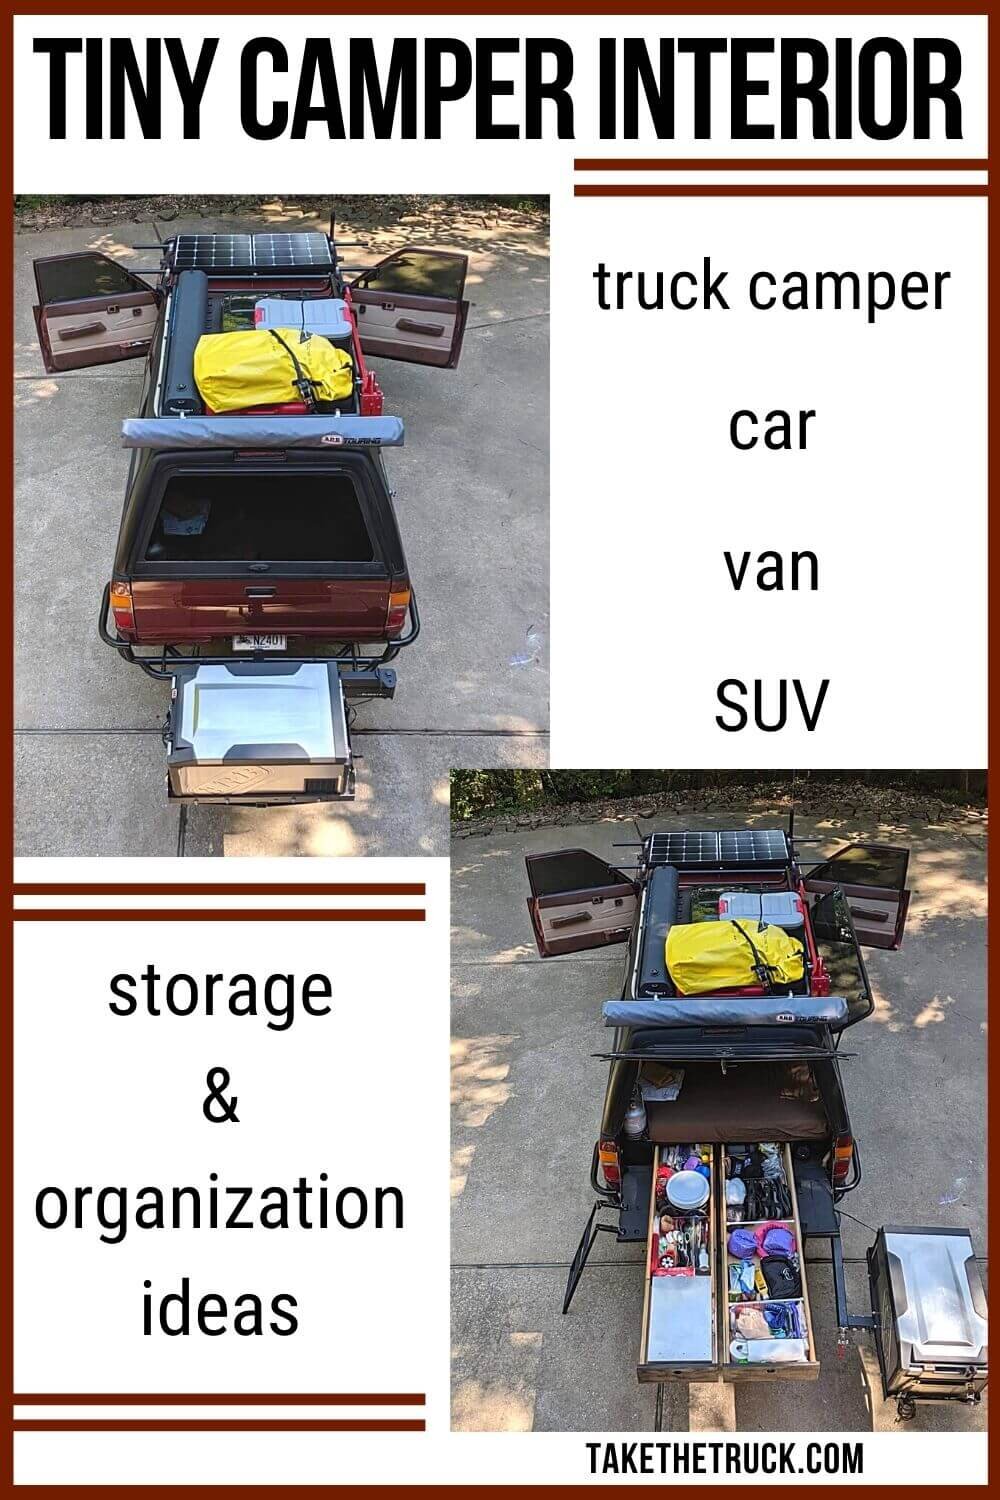 Staying organized in a tiny truck camper is not easy! Check out this post for truck camper interior storage and organization ideas and tips - lots of photos too! 